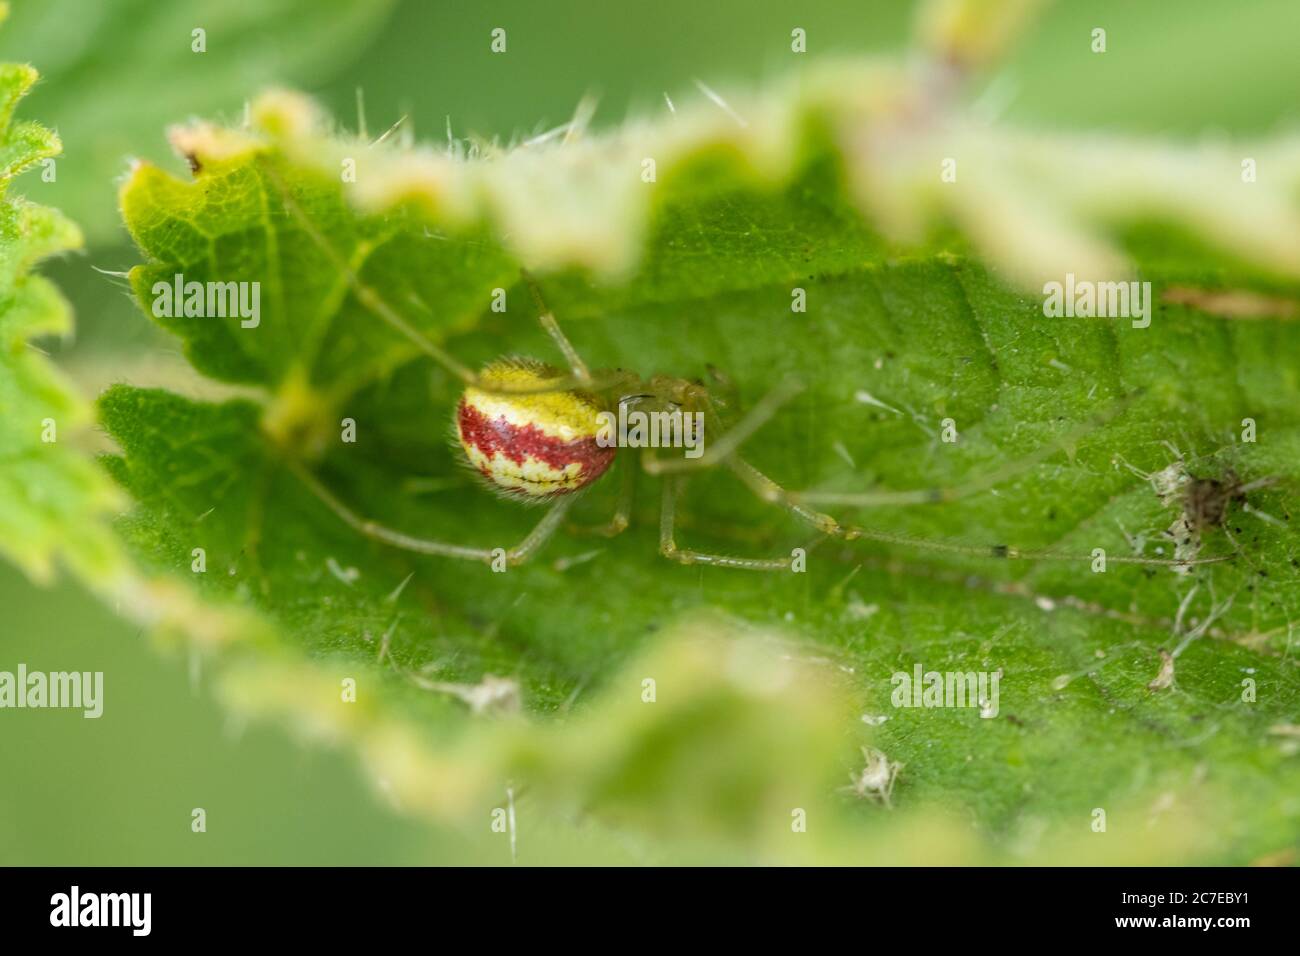 Common Candy-striped Spider (Enoplognatha ovata) on bramble leaf, UK Stock Photo